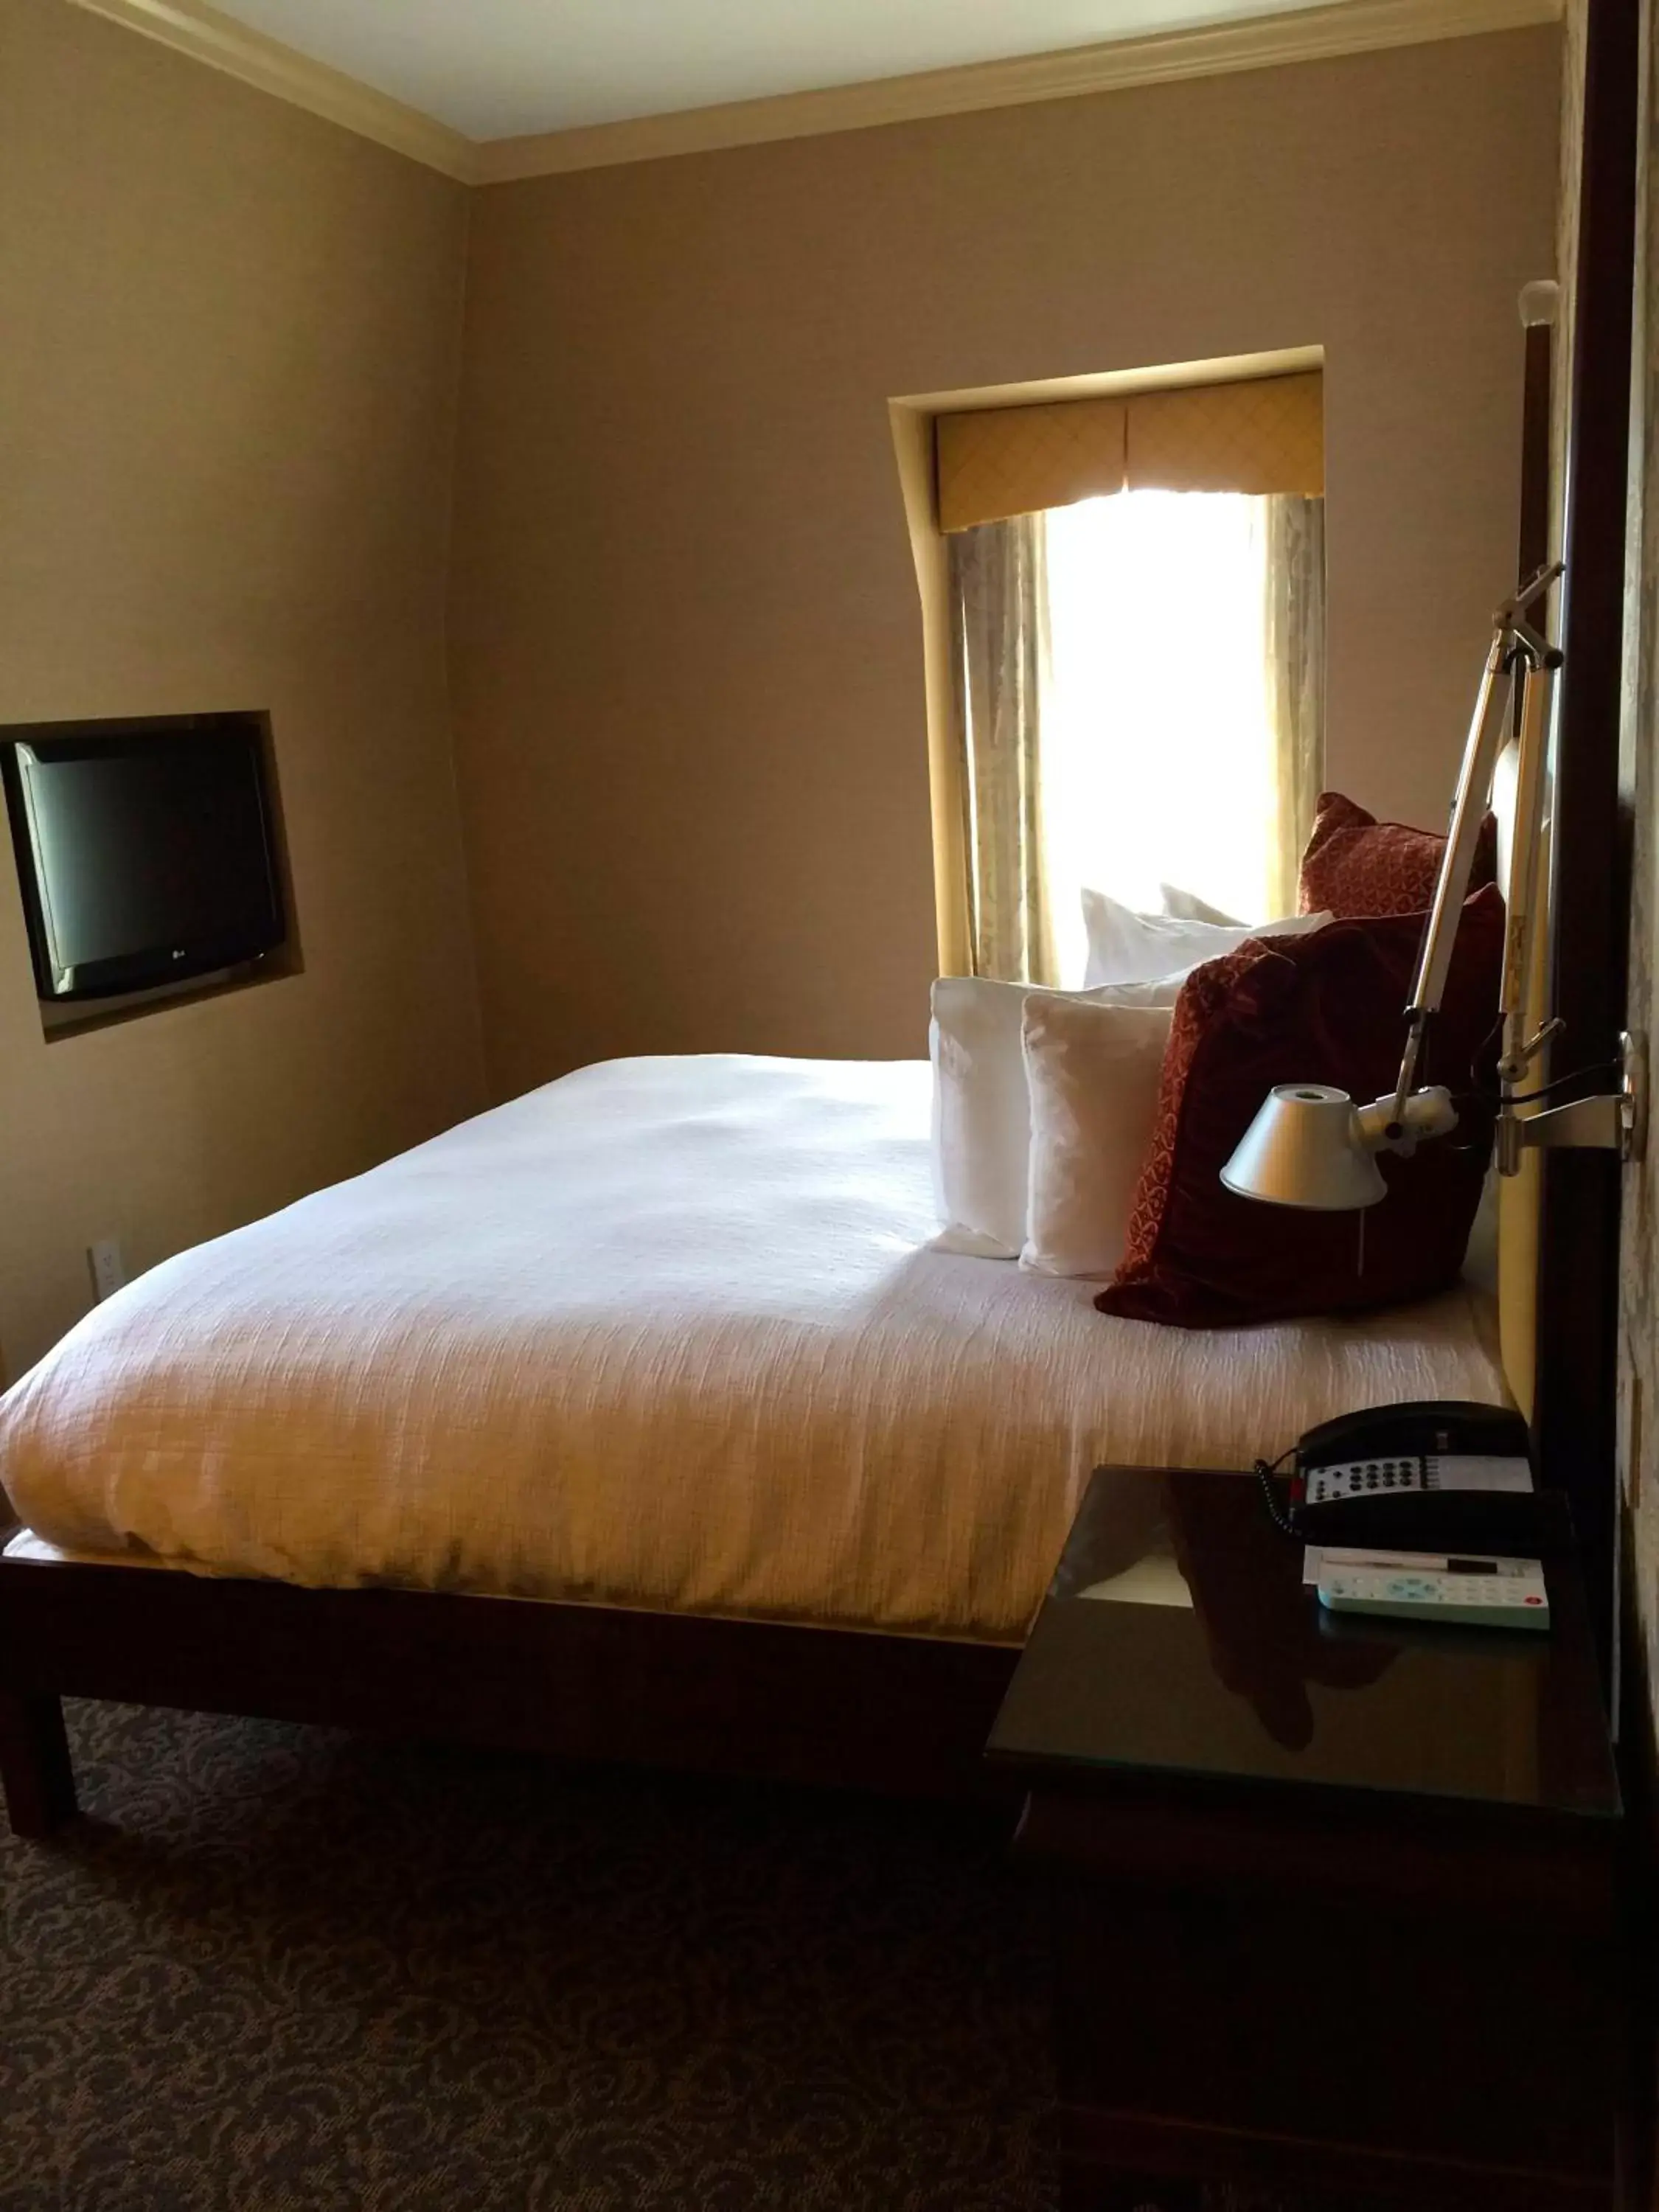 King Suite in Chestnut Hill Hotel